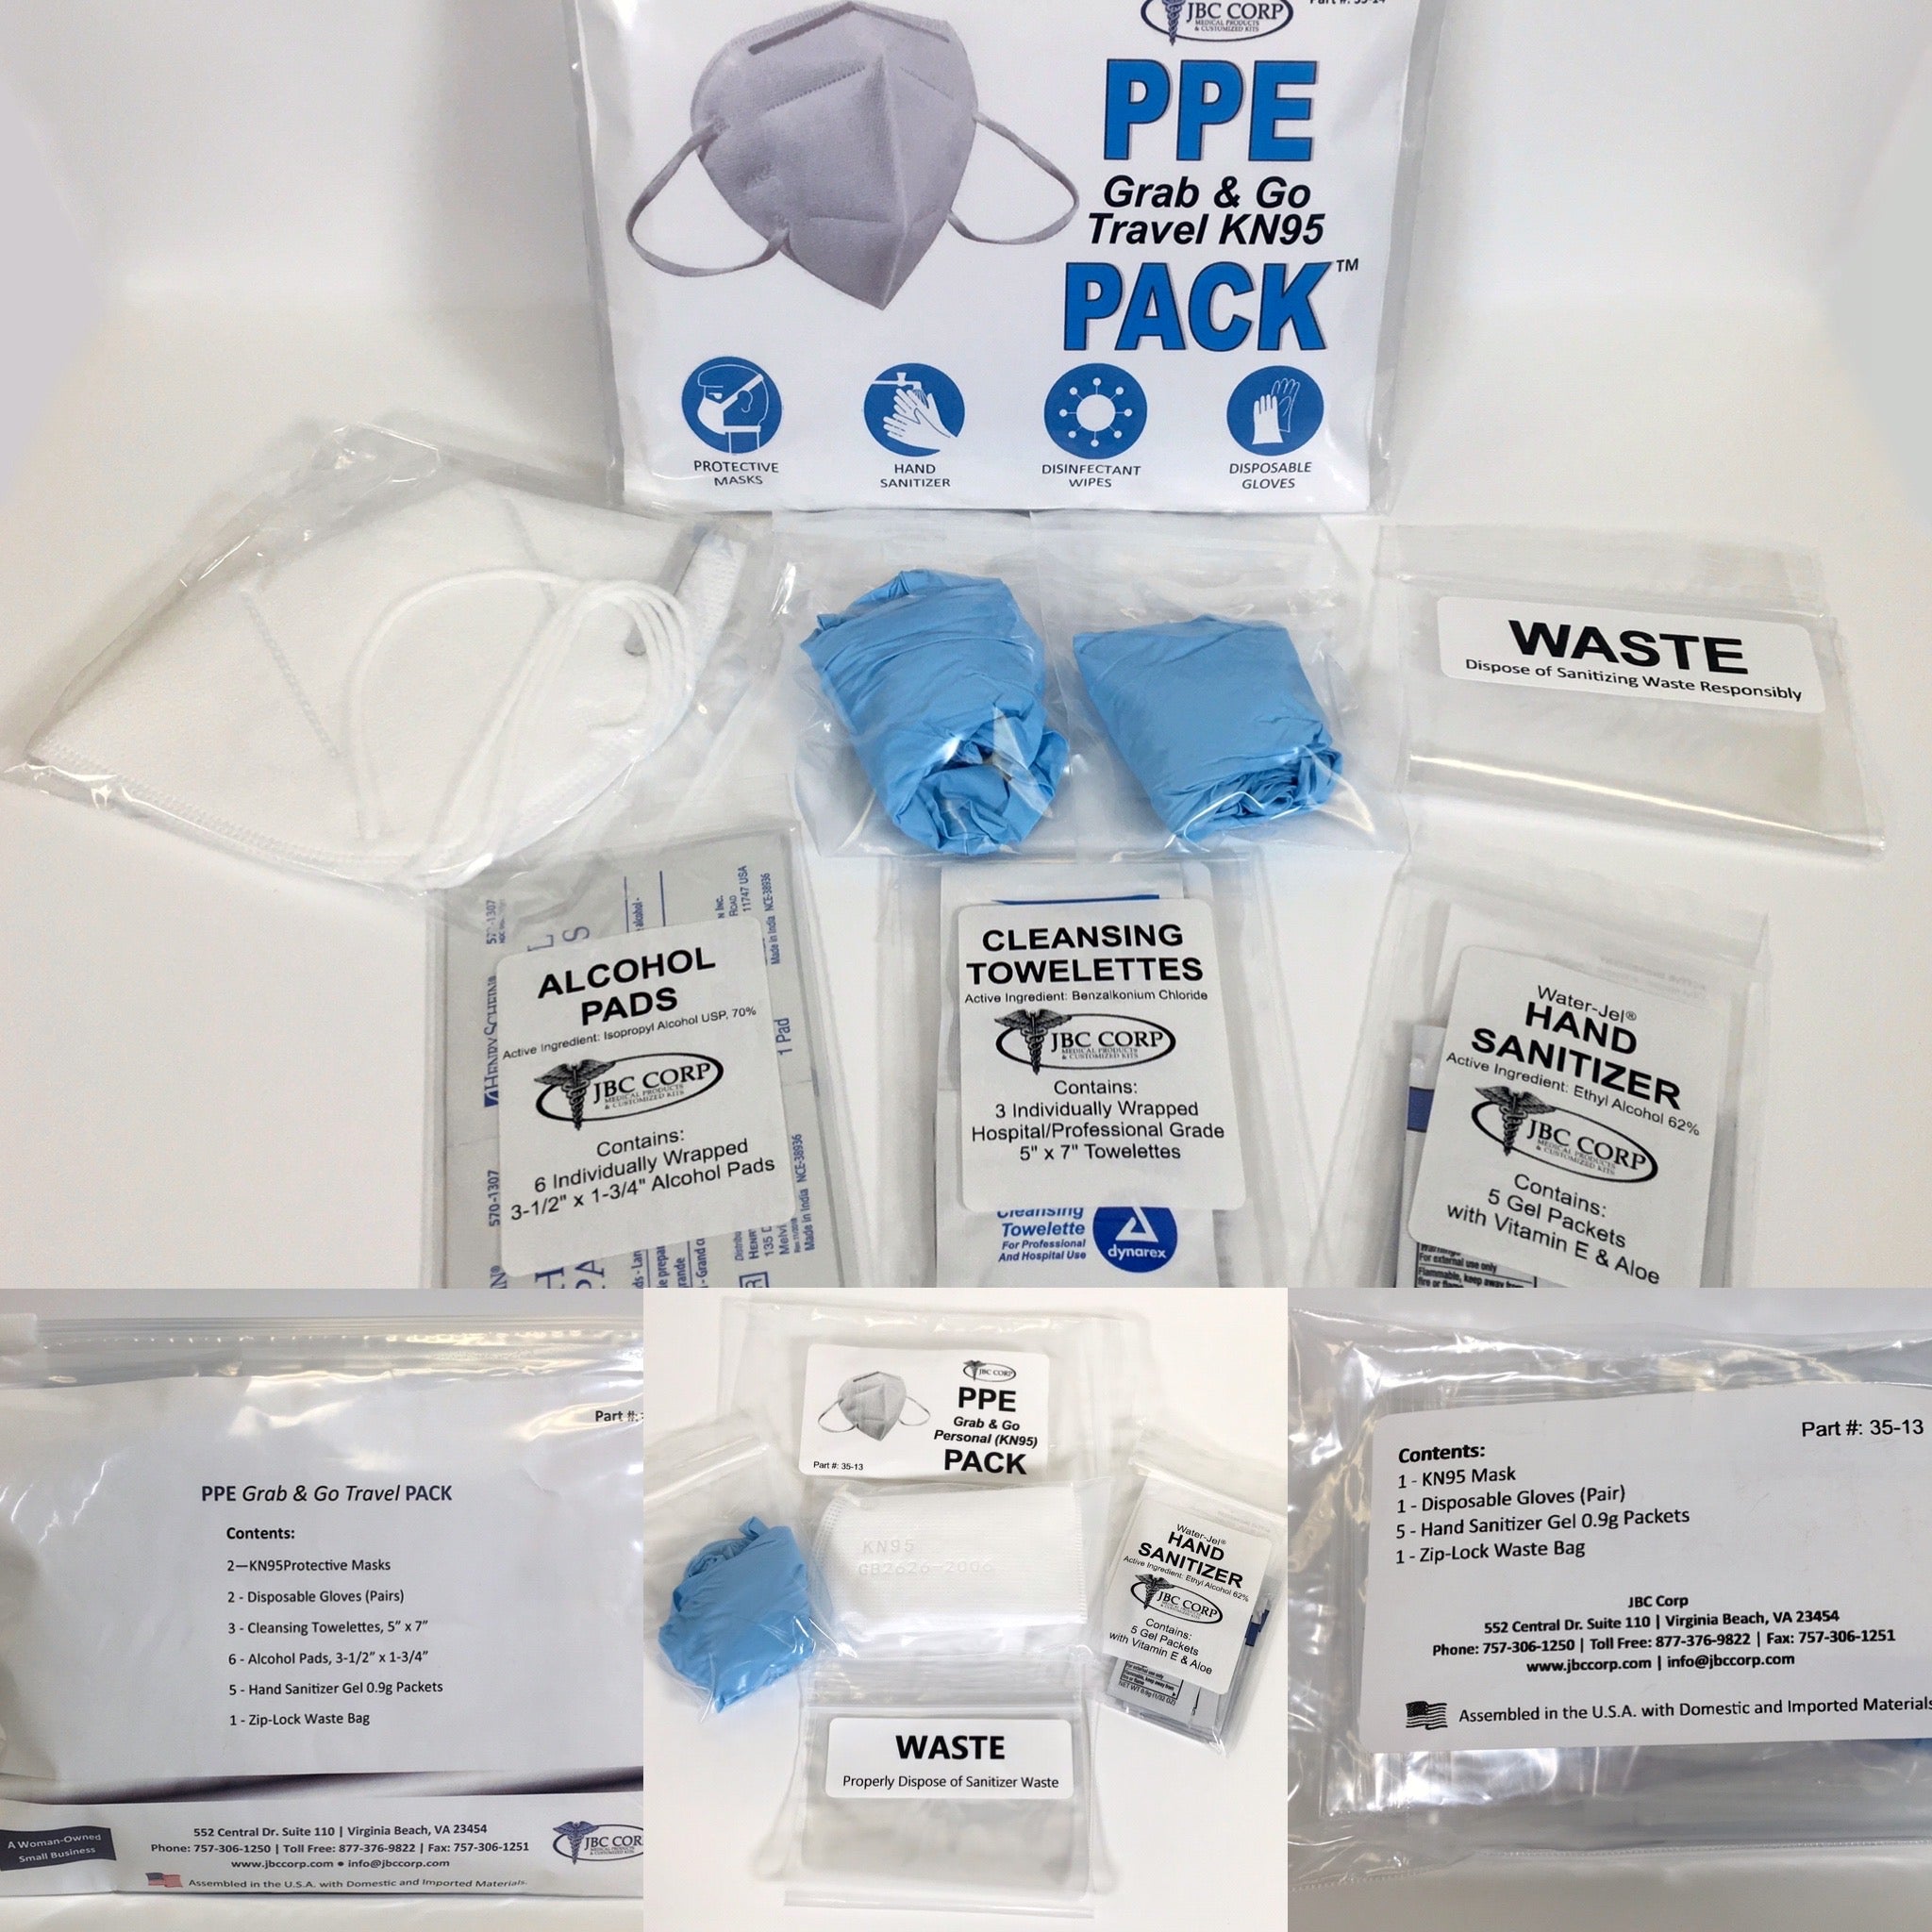 New PPE (Personal Protective Equipment) Kits!